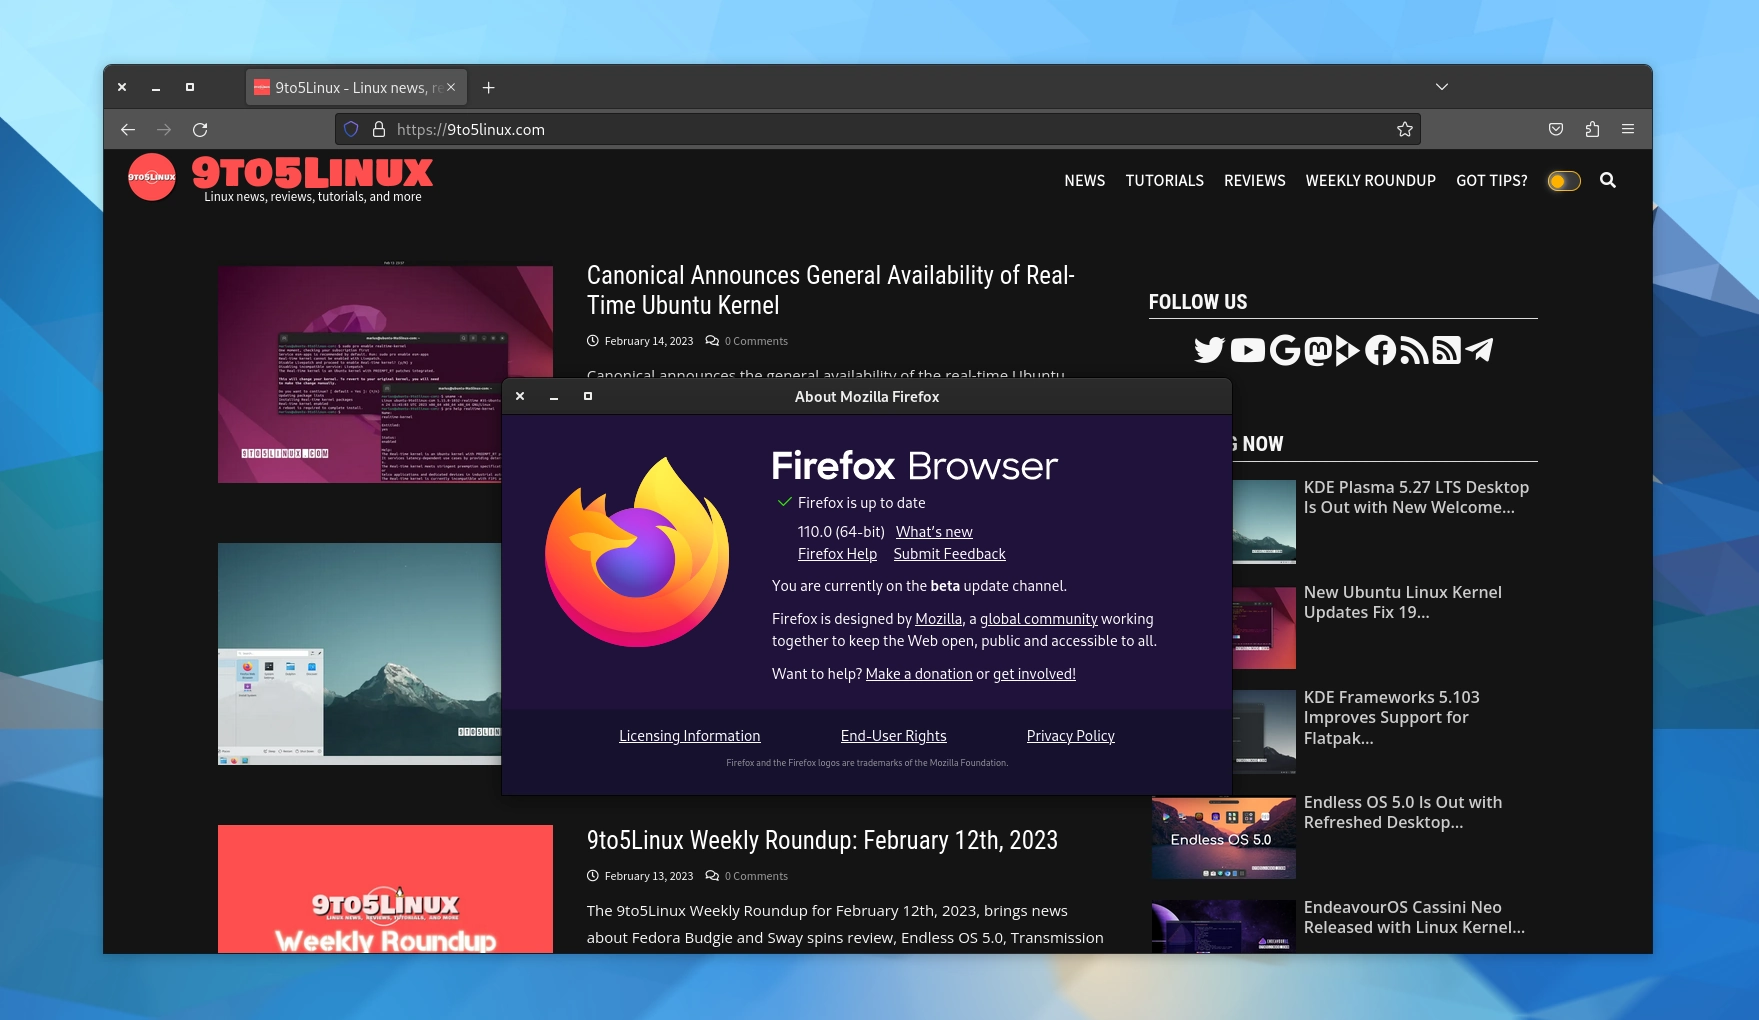 Mozilla Firefox 110 Is Now Available for Download, Here’s What’s New